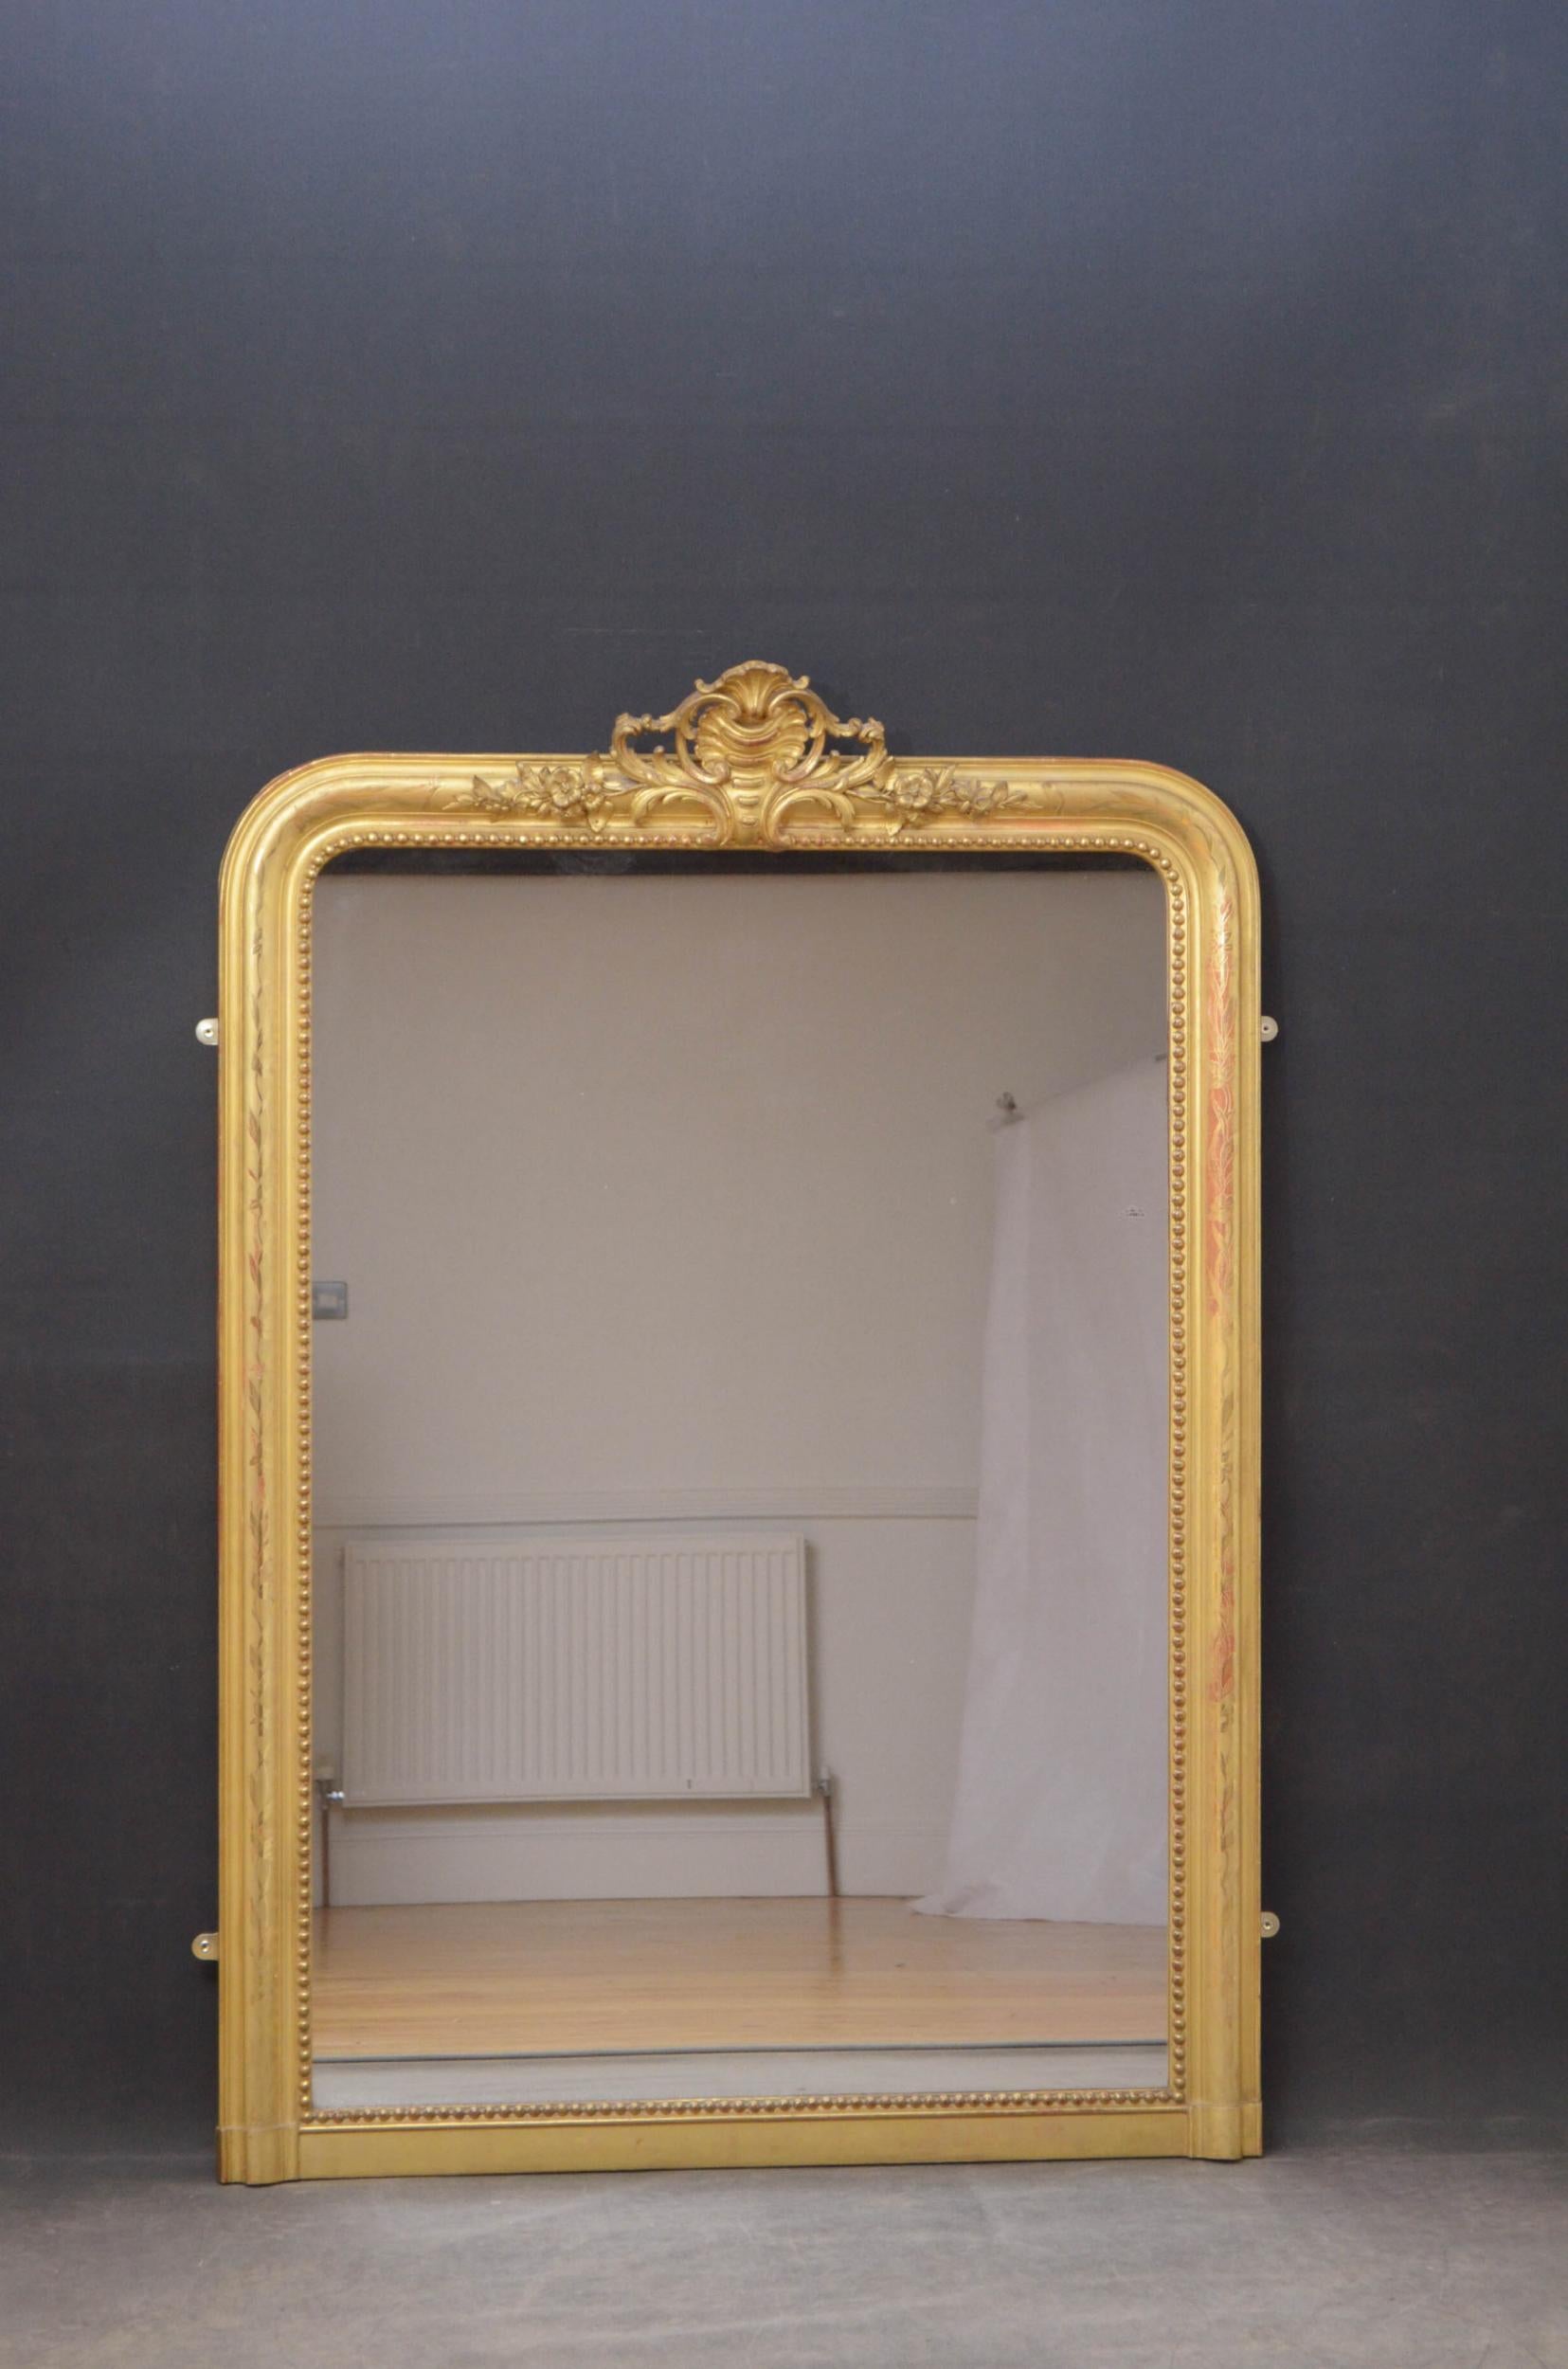 Sn4871 superb French gilded wall mirror, having original glass with some imperfections in beaded and gilded frame with and fabulous crest with scrolls and flowers to the centre and etched flowers decoration throughout. This antique mirror retains